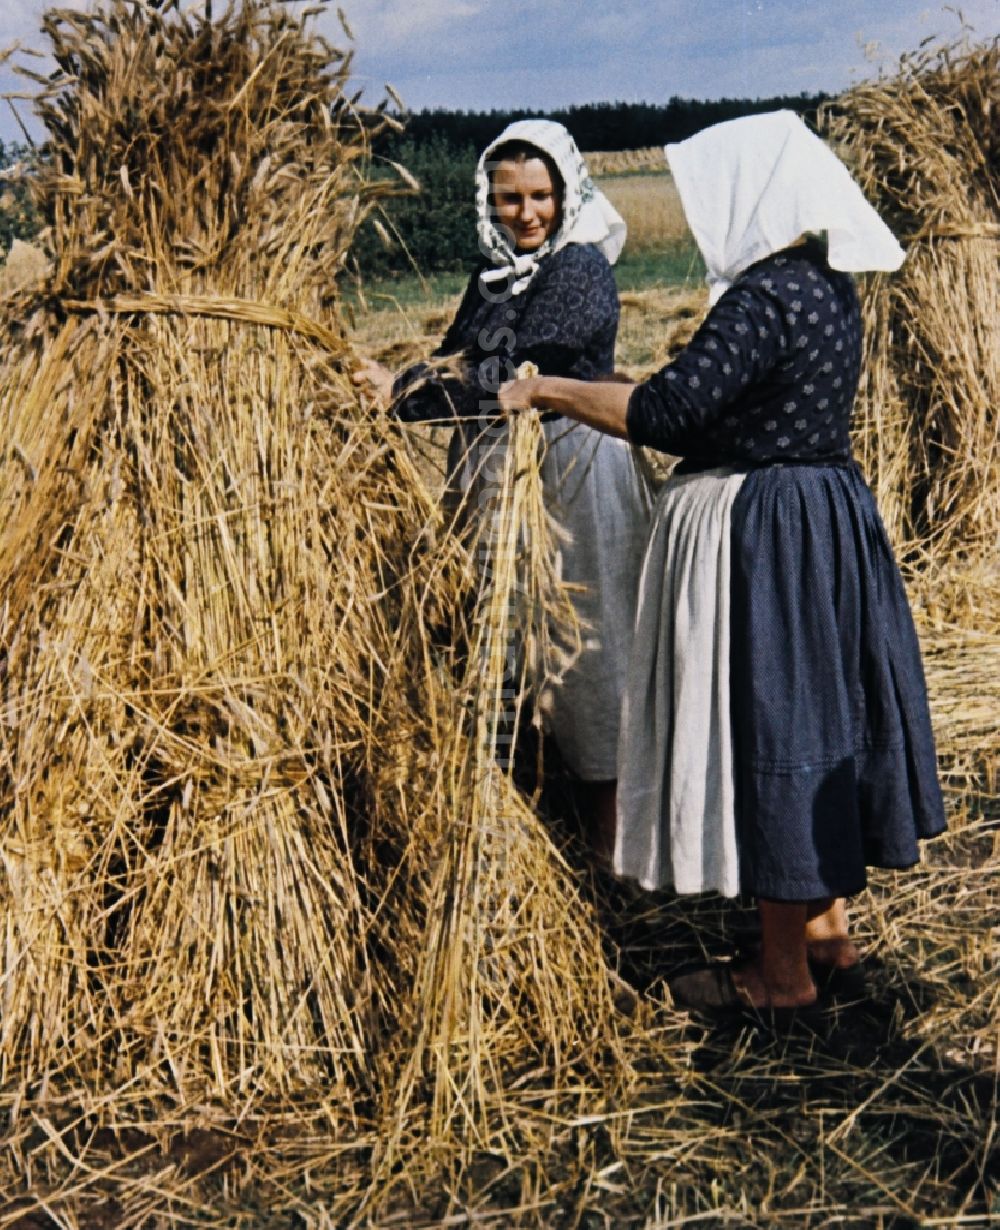 Teicha: Farmers harvesting grain and sheaf laying on a harvested field in Teicha in the state Saxony on the territory of the former GDR, German Democratic Republic